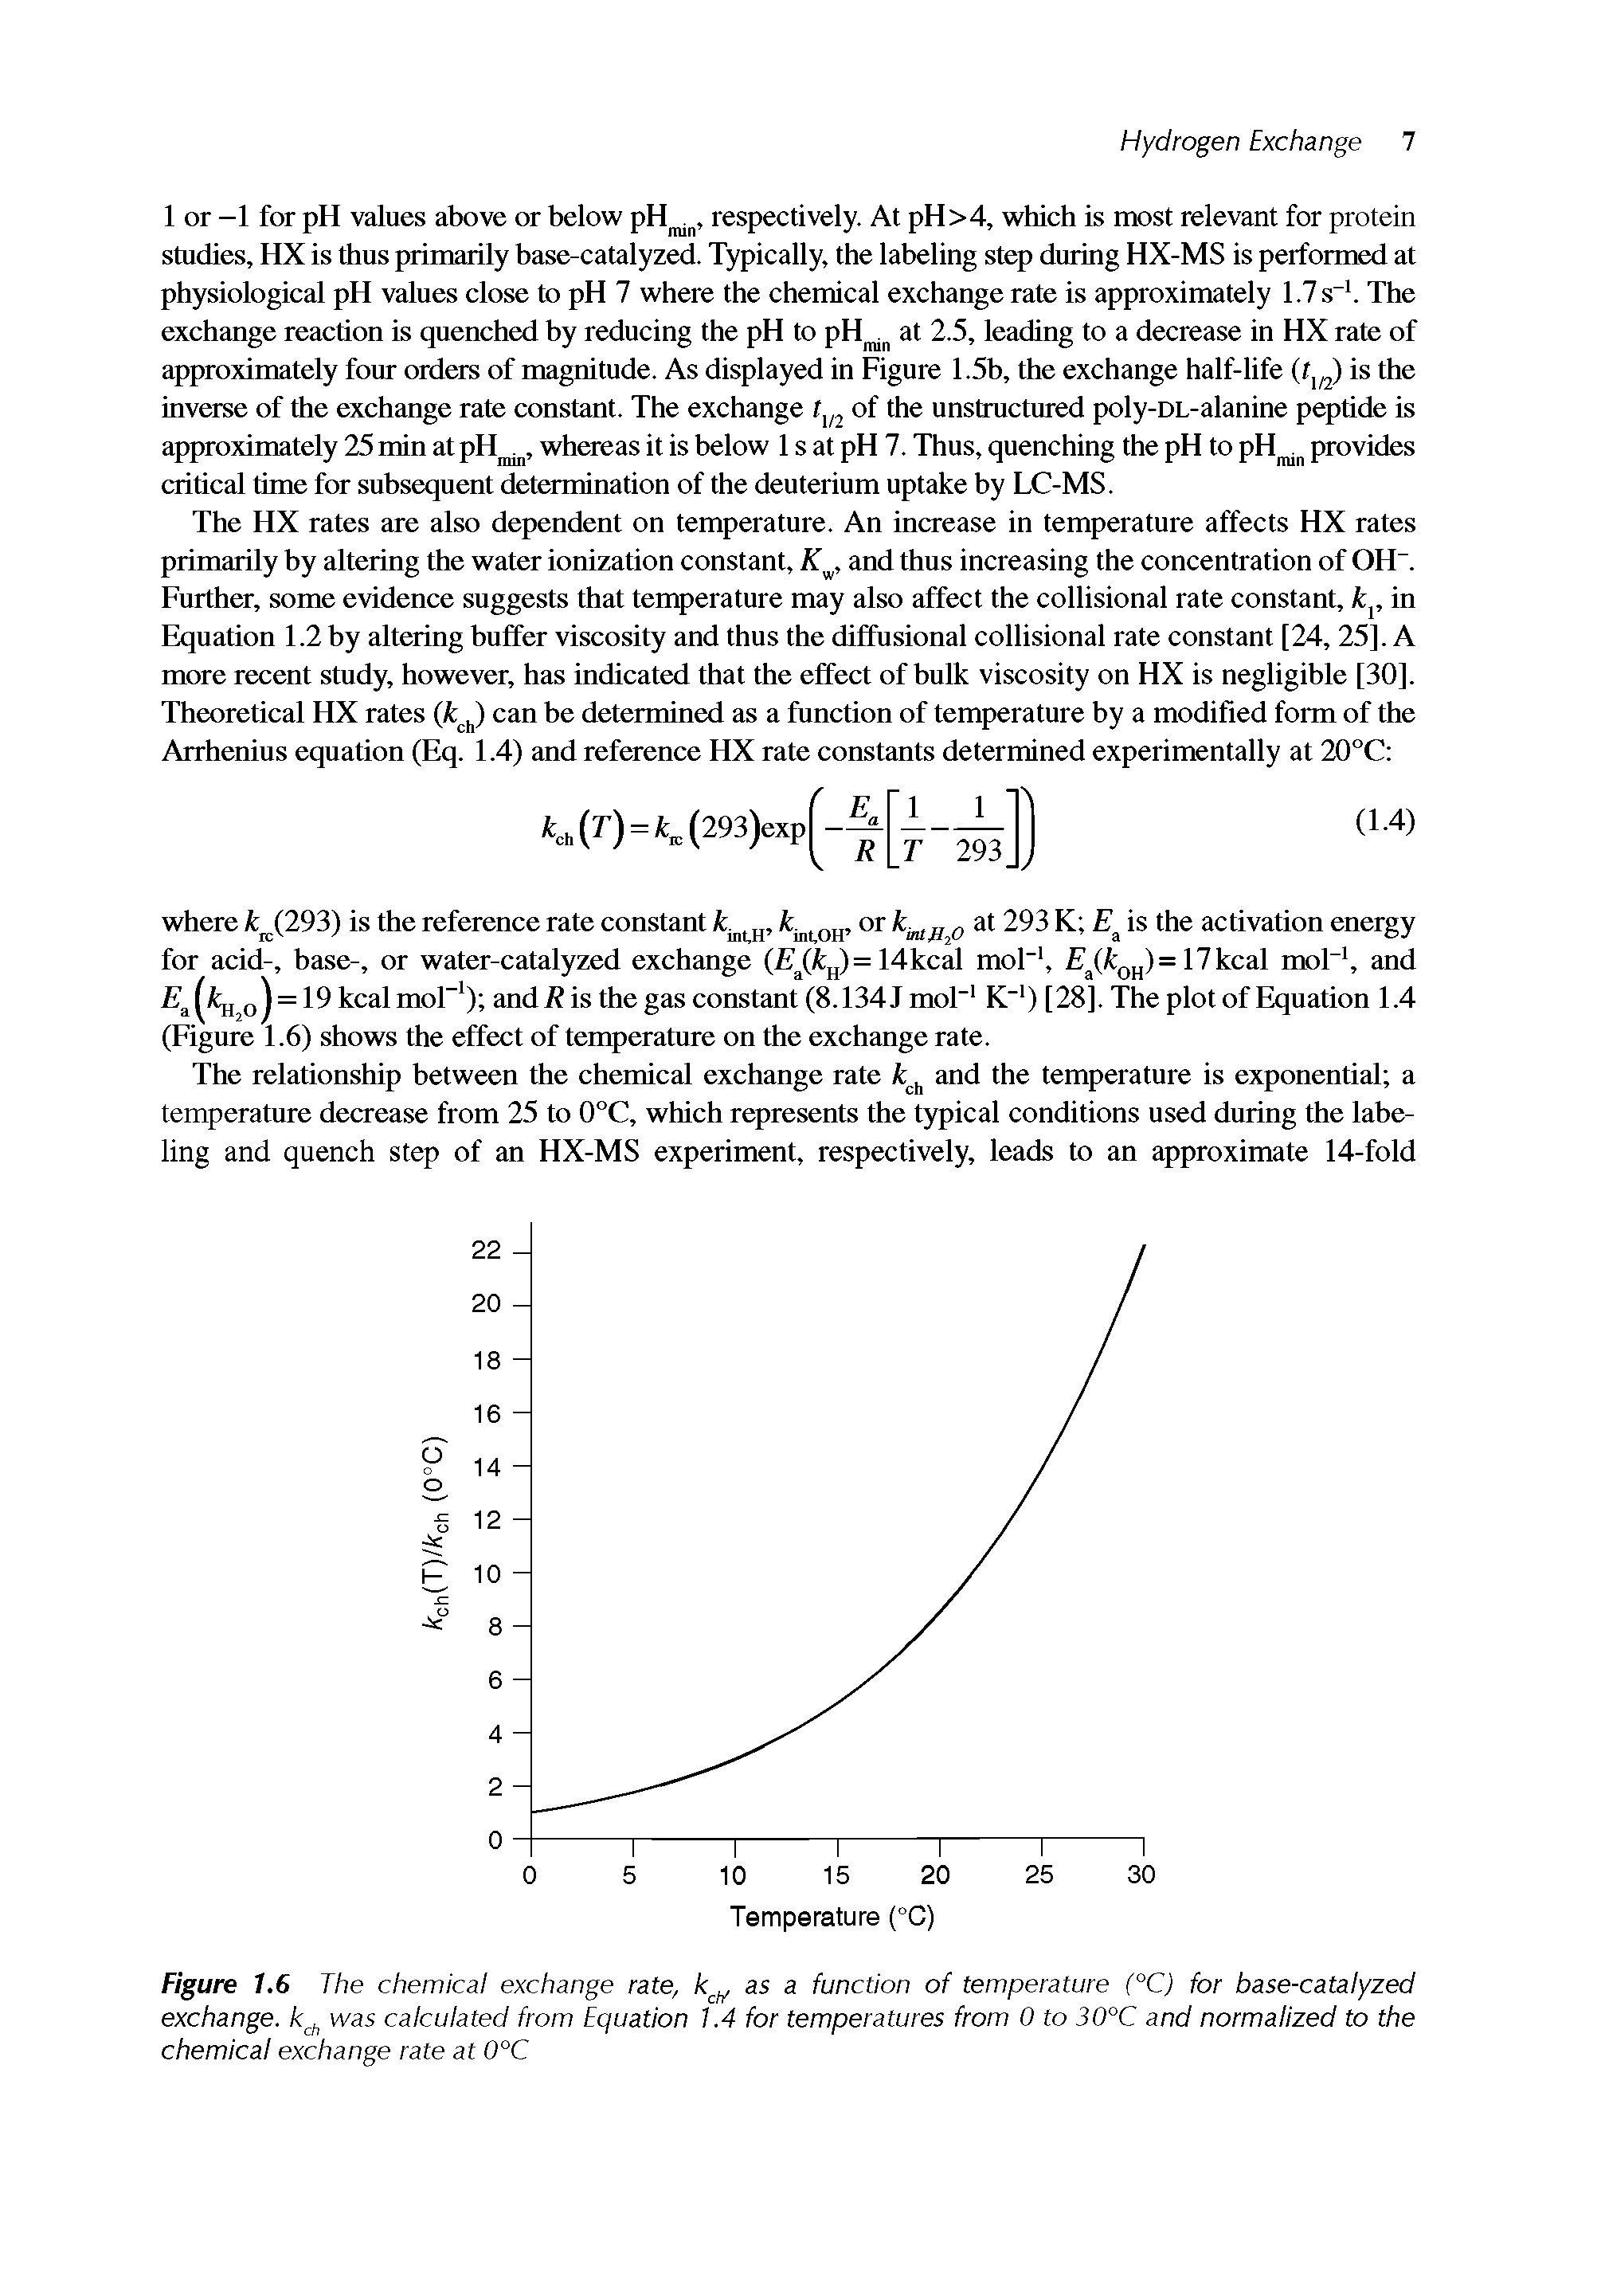 Figure 1.6 The chemical exchange rate, as a function of temperature (°C) for base-catalyzed exchange, was calculated from Equation 1.4 for temperatures from 0 to 30°C and normalized to the chemical exchange rate at 0°C...